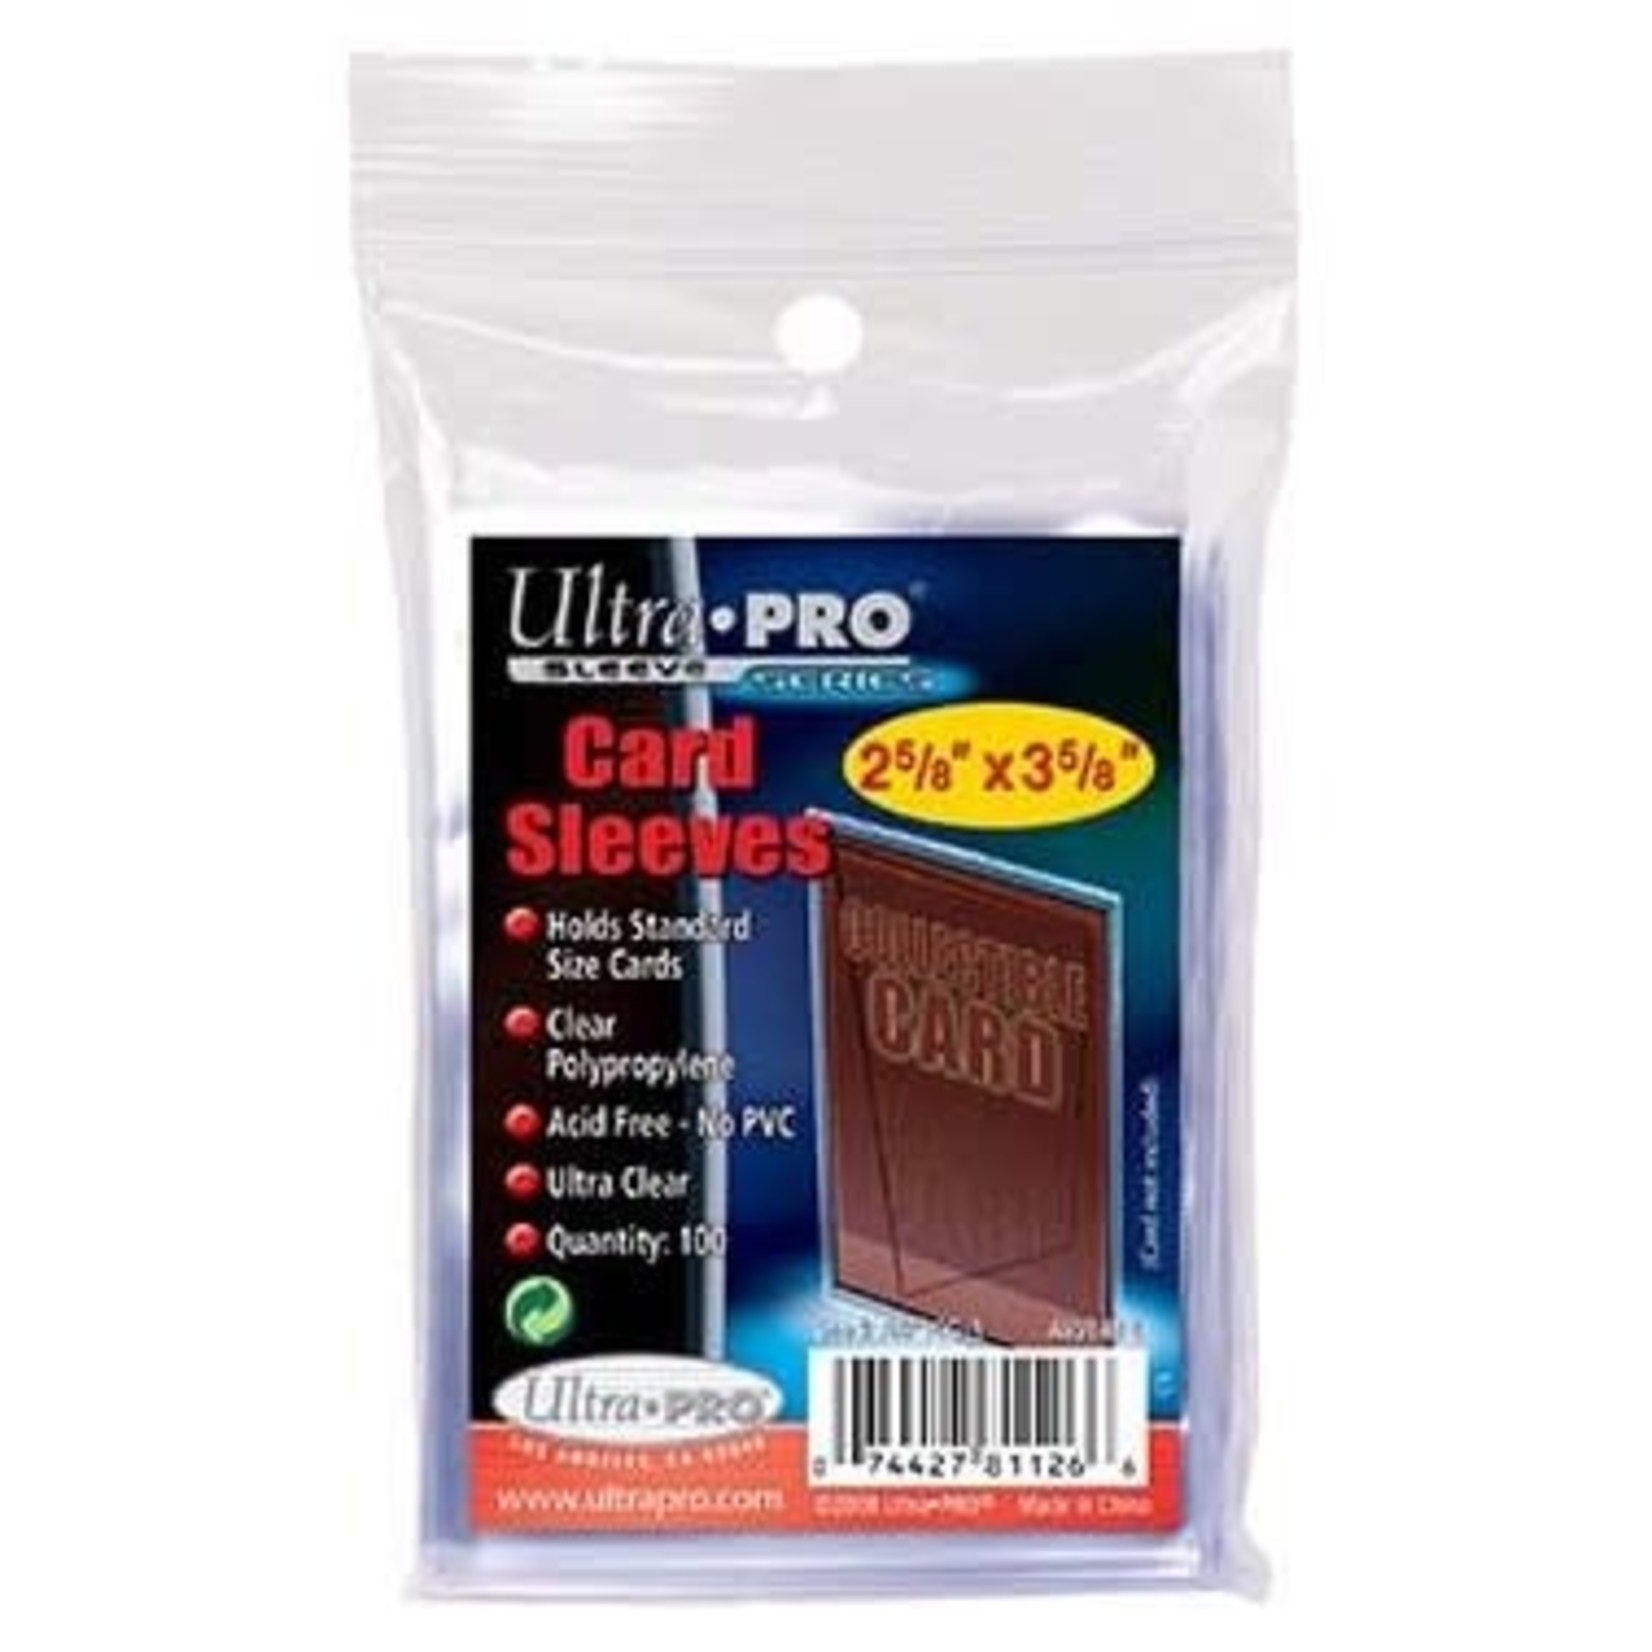 Ultra Pro Card Sleeves: SOFT "Penny Sleeves" (100 Count)